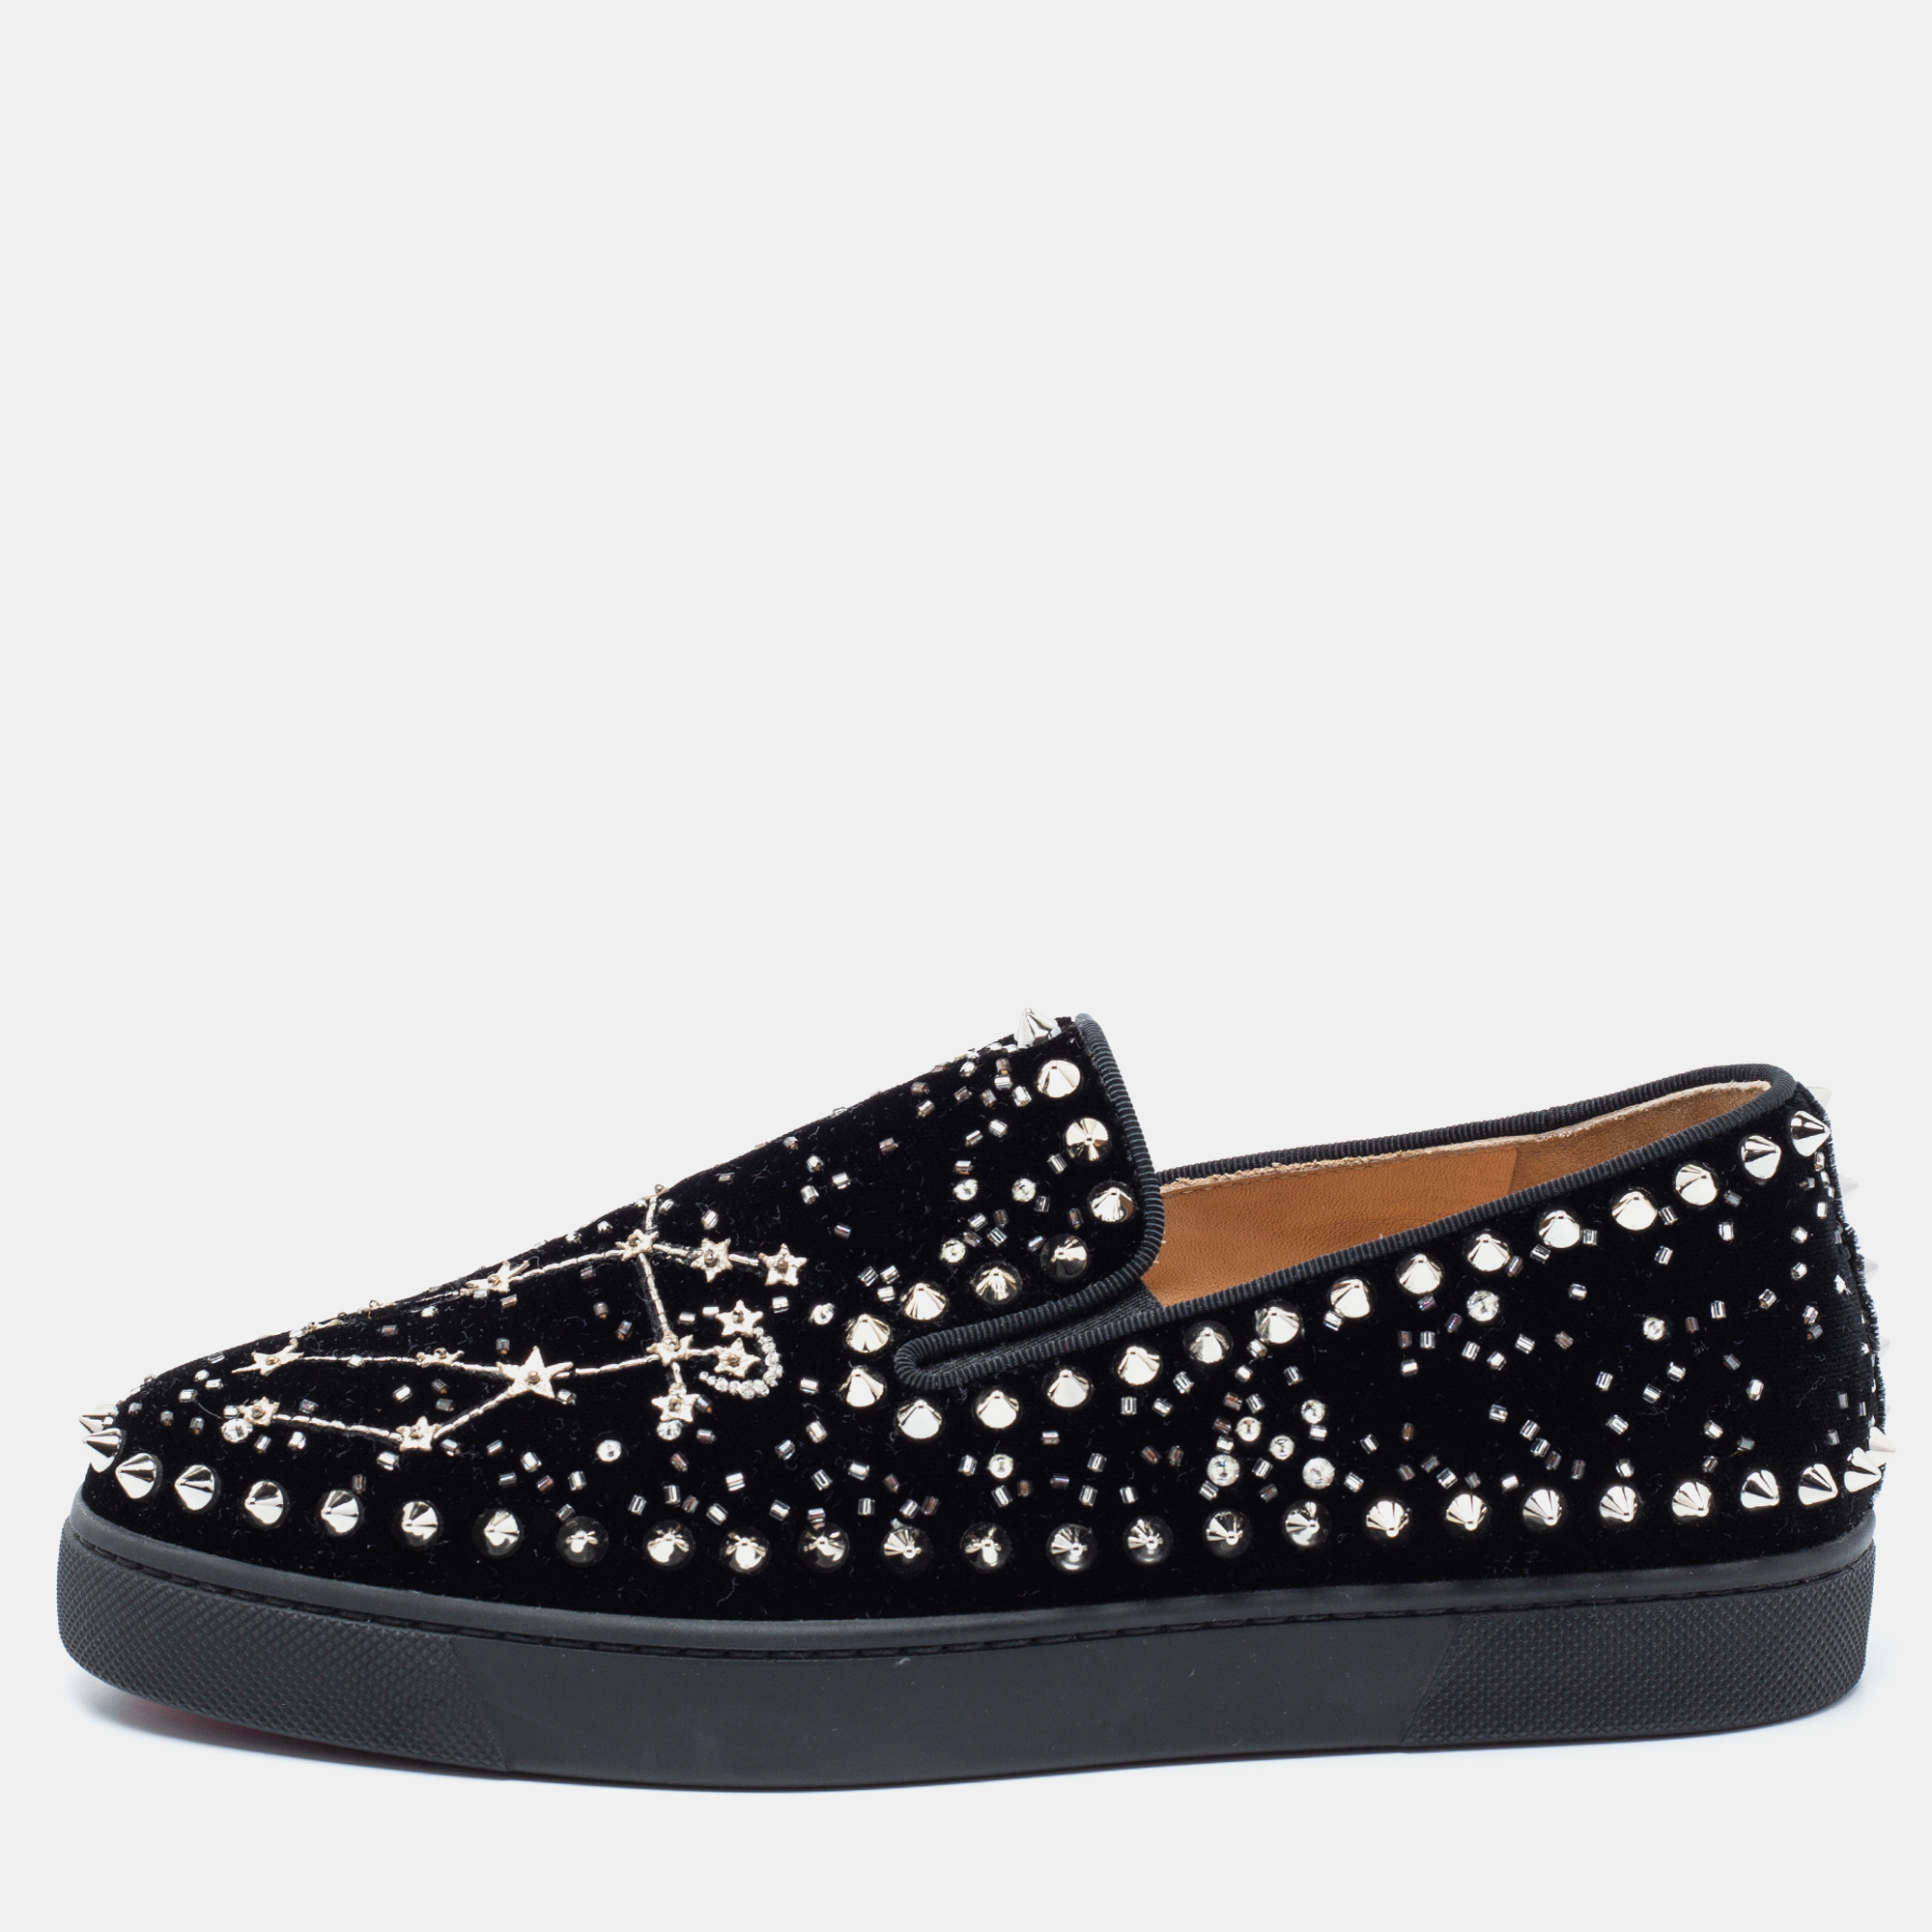 Beautifully crafted using black velvet these Christian Louboutin slip on sneakers are sure to keep you comfortably stylish. Featuring spikes and other embellishments on the uppers and flexible rubber soles in the iconic red these shoes will be a great addition to your closet.